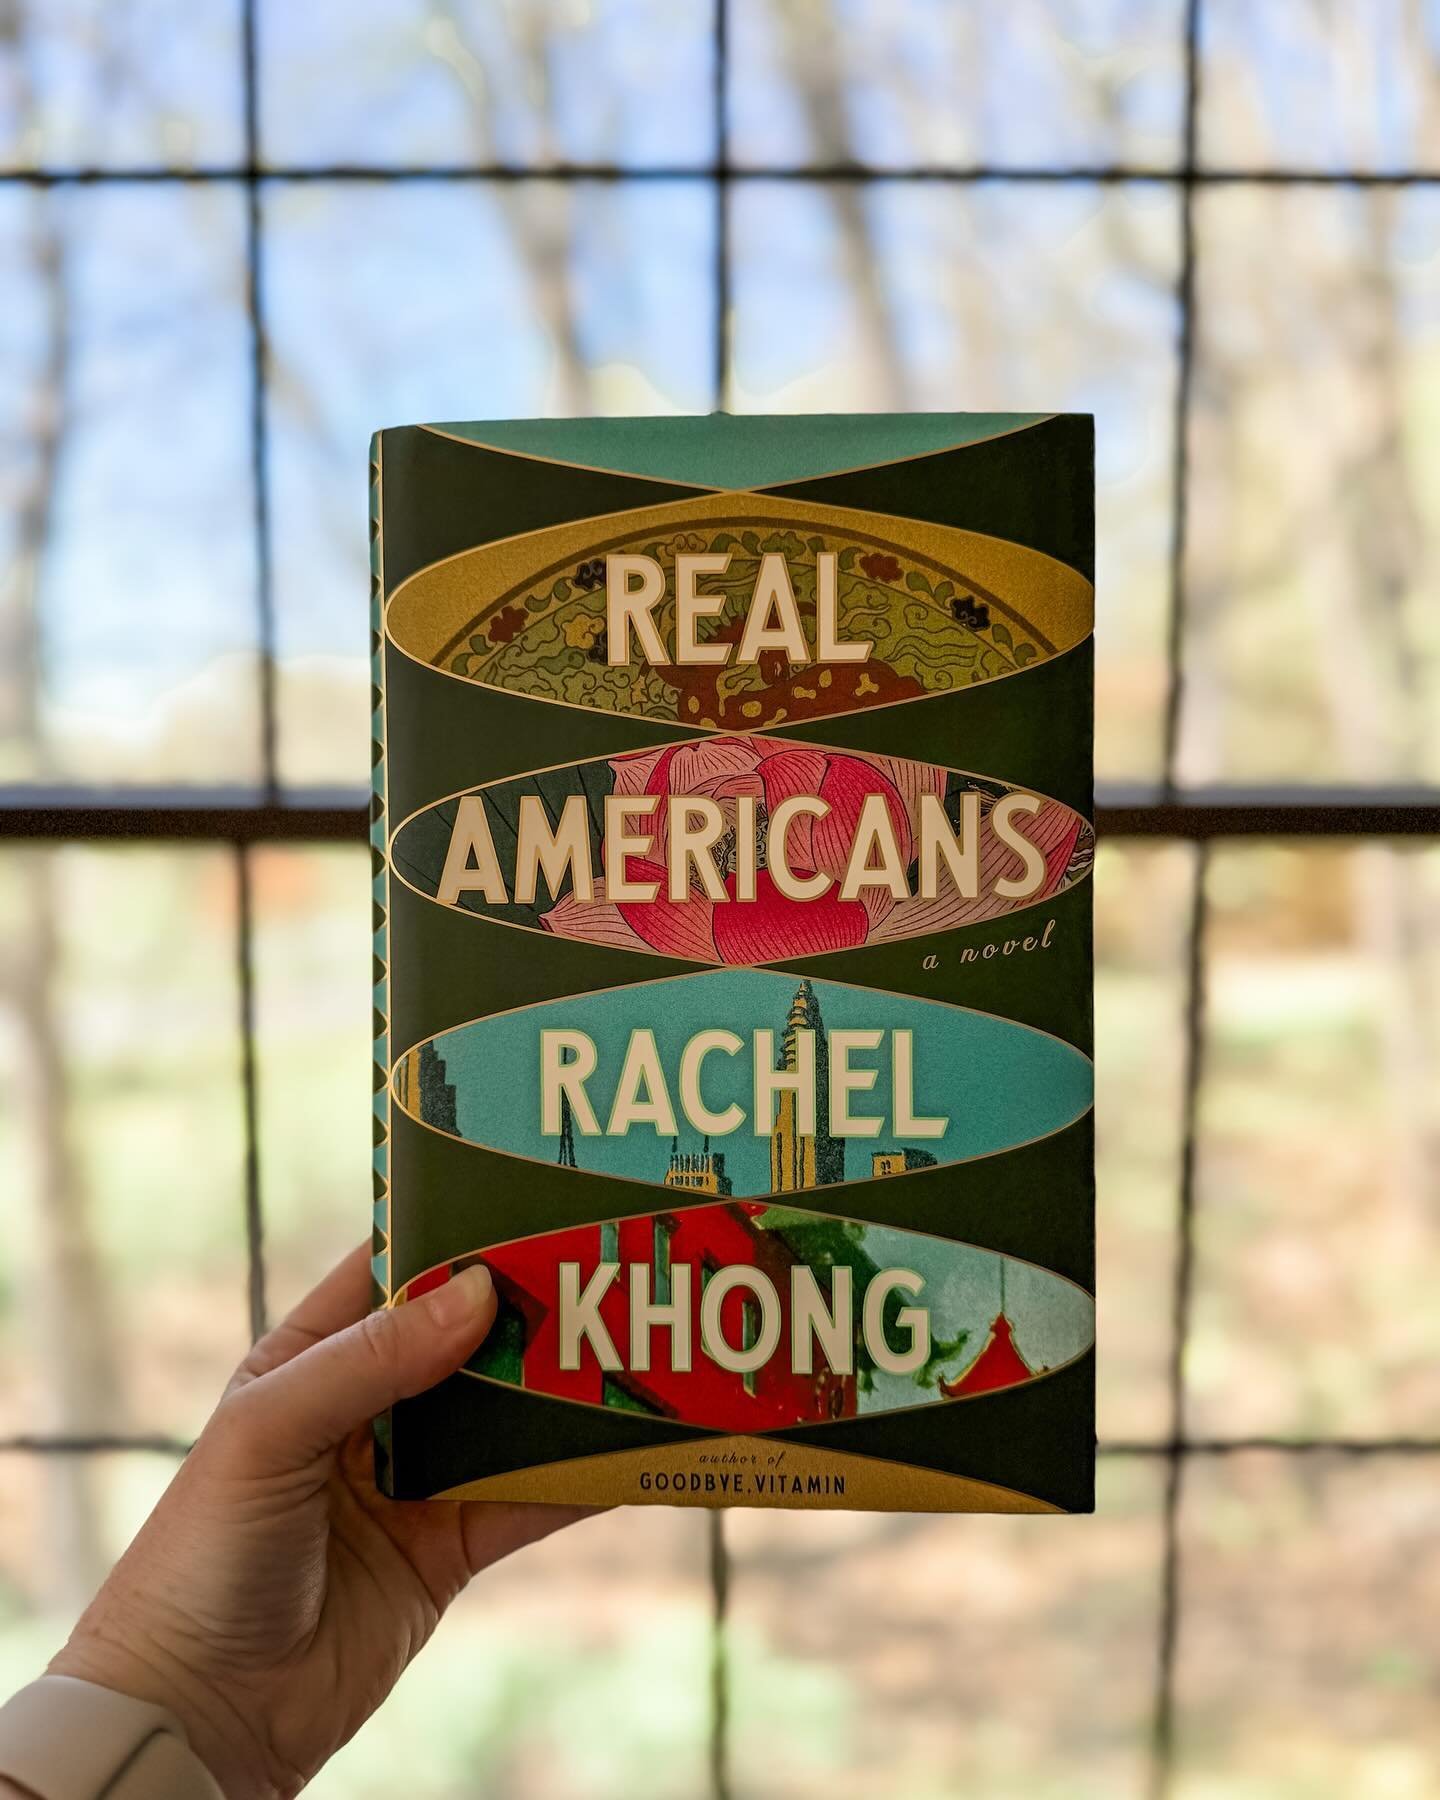 Real Americans (thanks @aaknopf!) is a compulsively readable, three-timeline, multigenerational family saga that would make an excellent book club pick (especially during AAPI Heritage Month). I flew through its 400 pages in 24 hours!
⠀⠀⠀⠀⠀⠀⠀⠀⠀
It fo